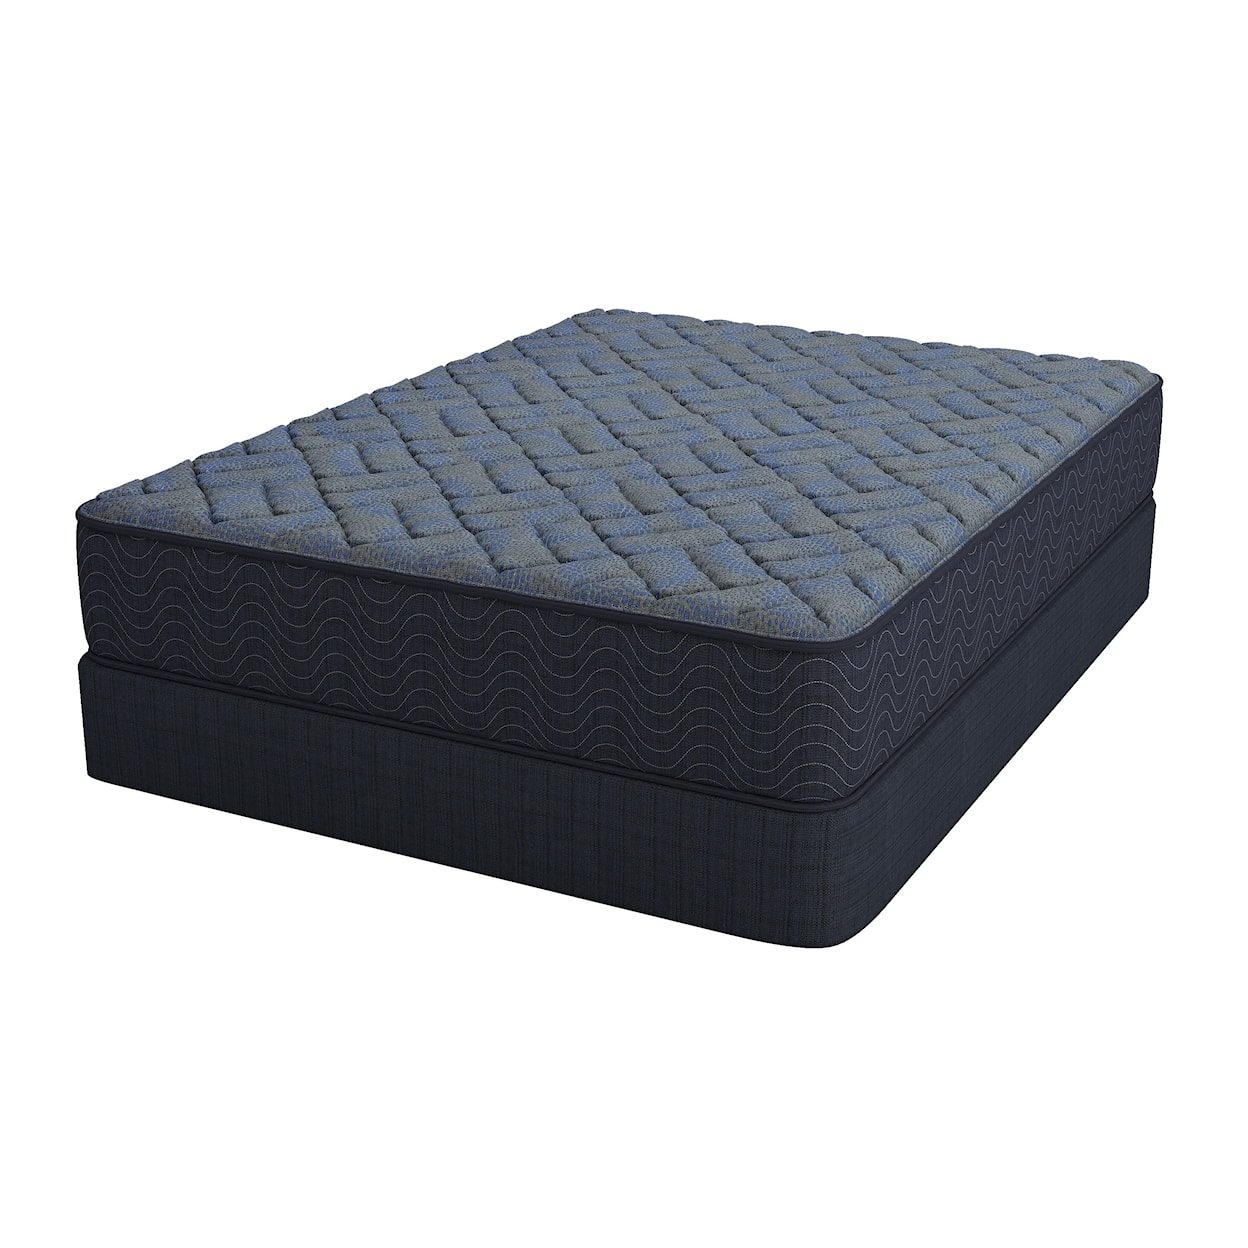 Southerland Bedding Co. Brantley Firm Full Brantley Firm Mattress